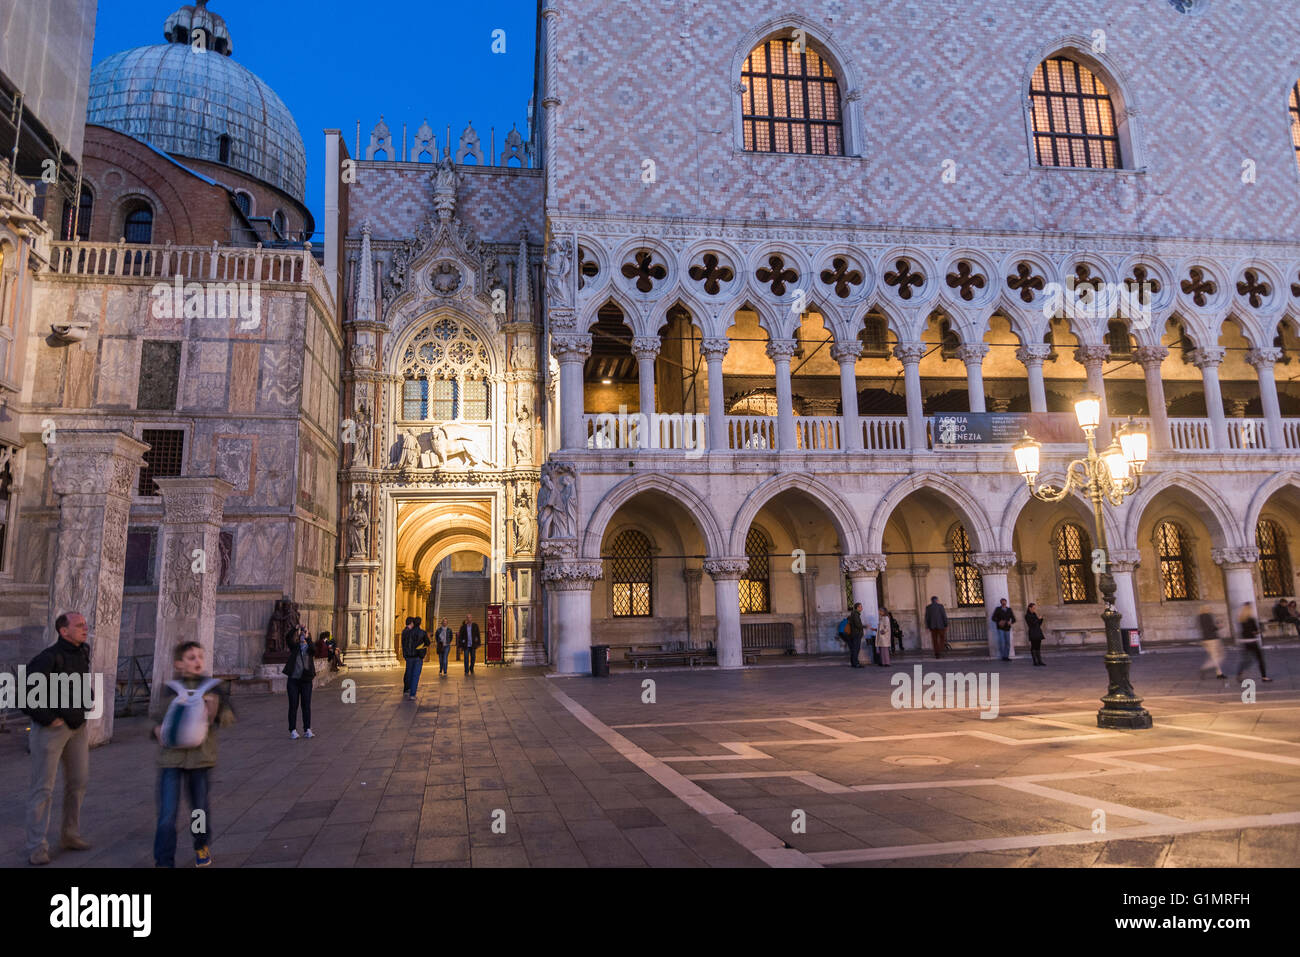 Palazzo Ducale (doge's palace) and Basilica di San Marco, by night seen from Piazza San Marco Stock Photo